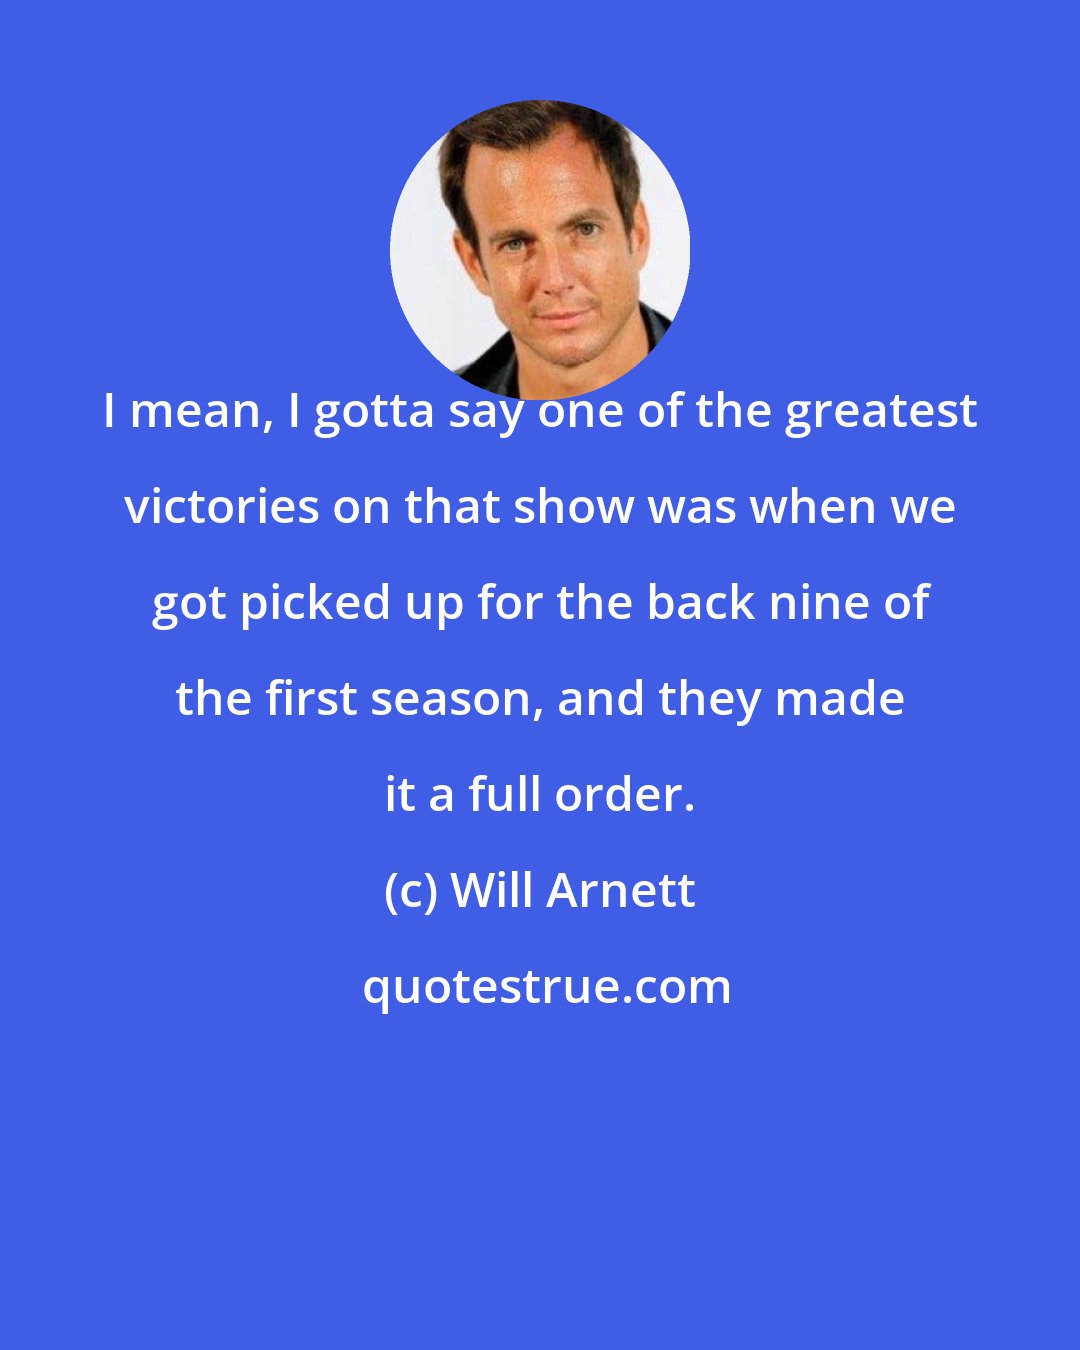 Will Arnett: I mean, I gotta say one of the greatest victories on that show was when we got picked up for the back nine of the first season, and they made it a full order.